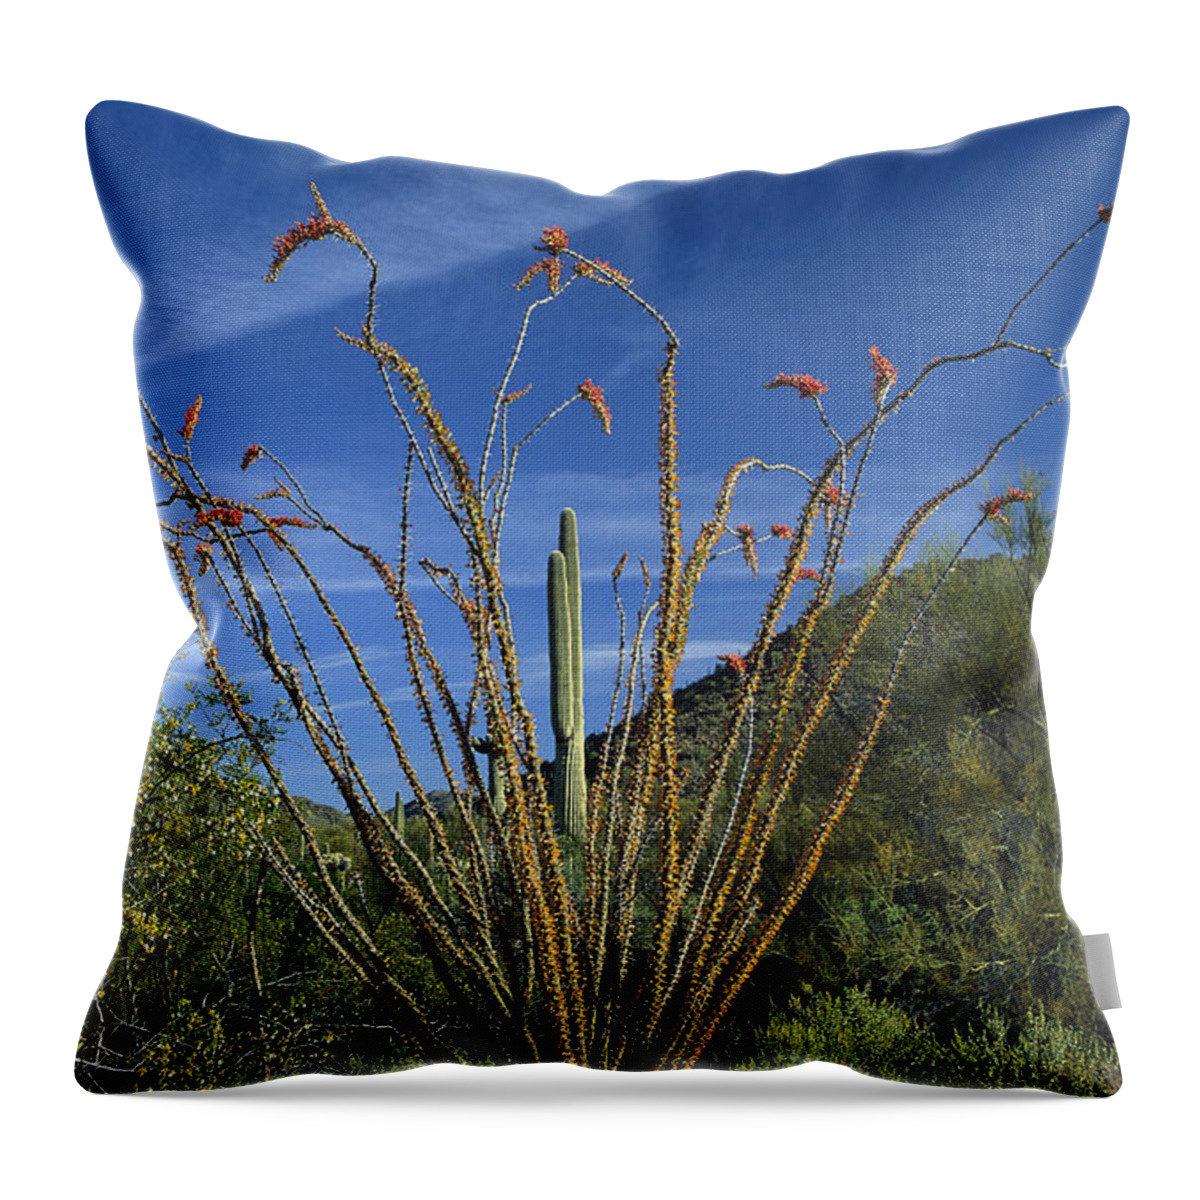 00171159 Throw Pillow featuring the photograph Ocotillo Saguaro And Palo Verde Arizona by Tim Fitzharris